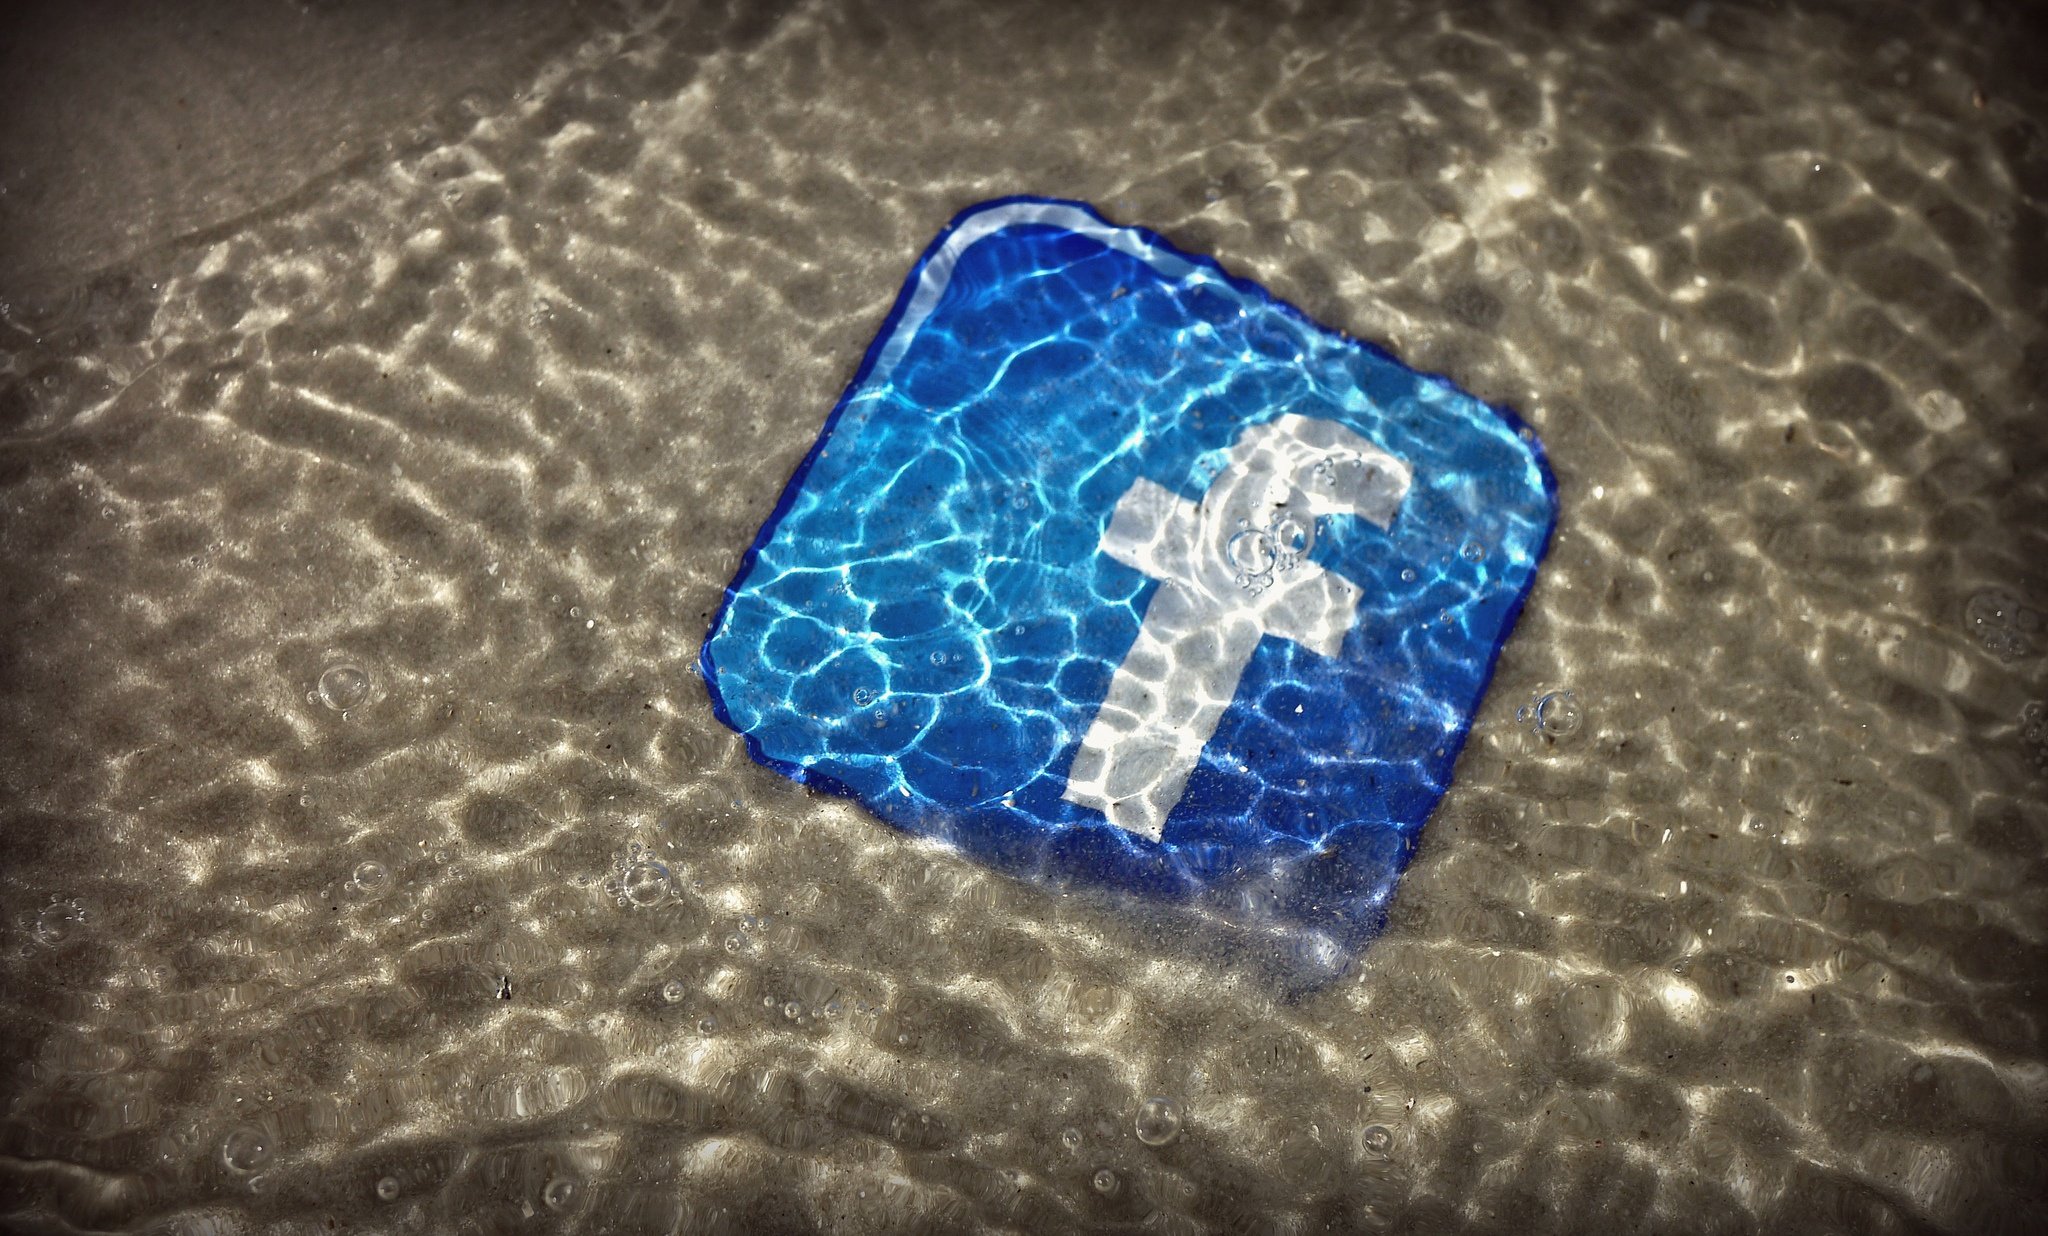 Do You Want To Stay Hidden On Facebook? Read This.